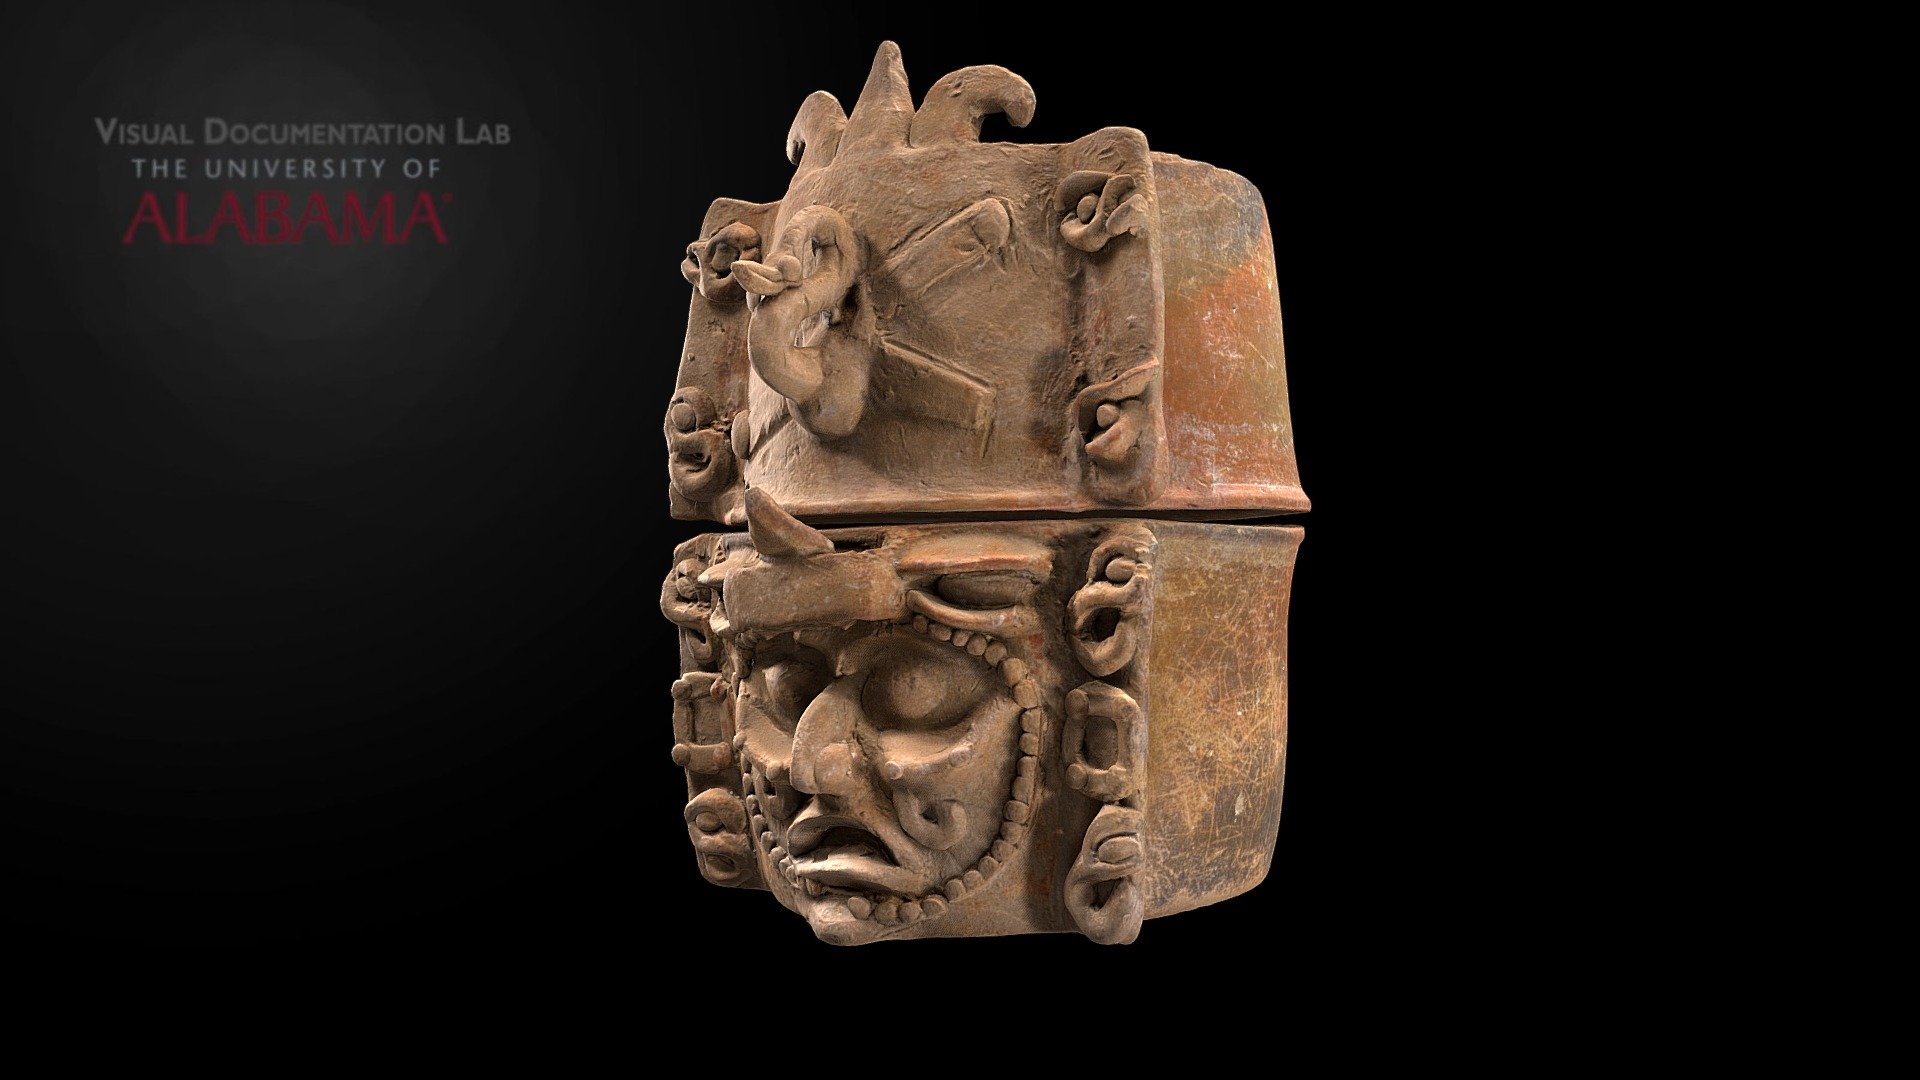 Lidded cache vessel (some would classify it as an incense burner, but it does not seem to be the case) /// The vessels represents the Sun God with serpents, and a possibly cormorant (?). /// Classic Maya /// Late Classic period (AD 600-800). /// Group I, Holmul. /// Photogrammetry (Sony A7RIII + Canon 50mm + Agisoft Metashape Pro). /// Lid and Body processed separately and then manually reoriented in Geomagic Wrap. /// Shaded, surface details, and occlusion (textures are based on a larger 70M model) - HOL.T.84.11.02.02/17.7.55.83 - 3D model by Alexandre Tokovinine (@tokovinin3d) 3d model